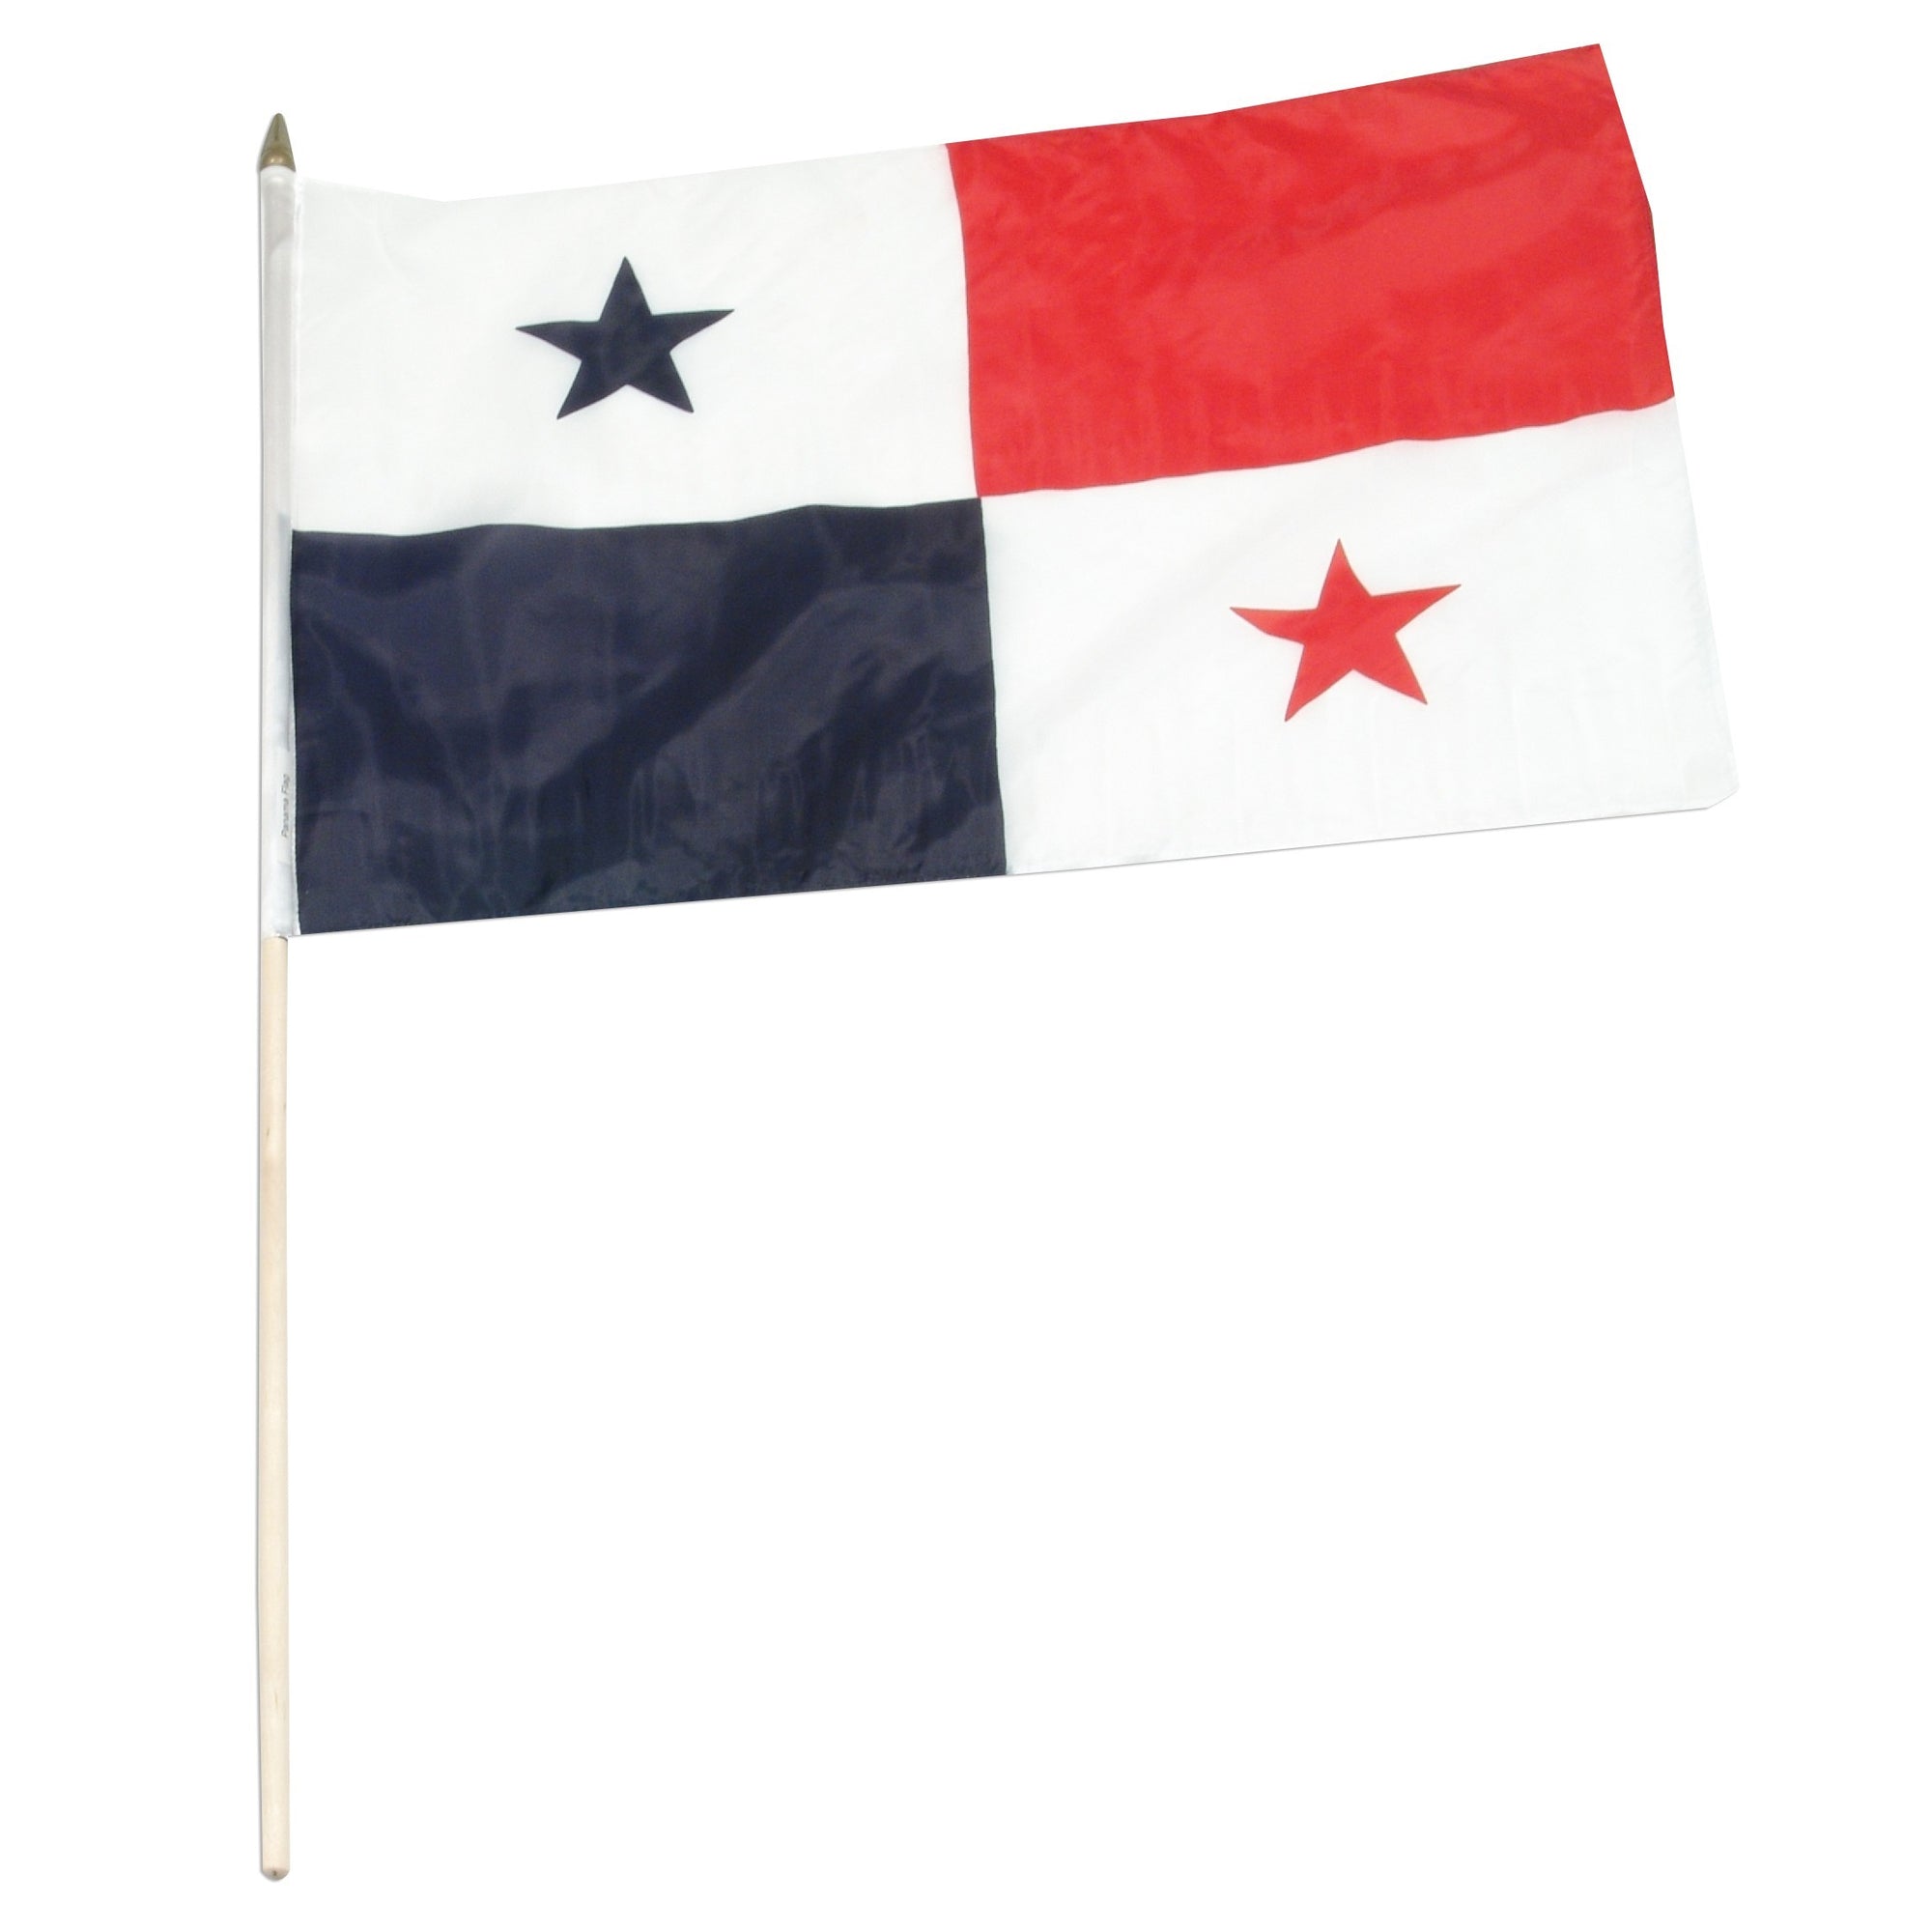 Panama flags for sale